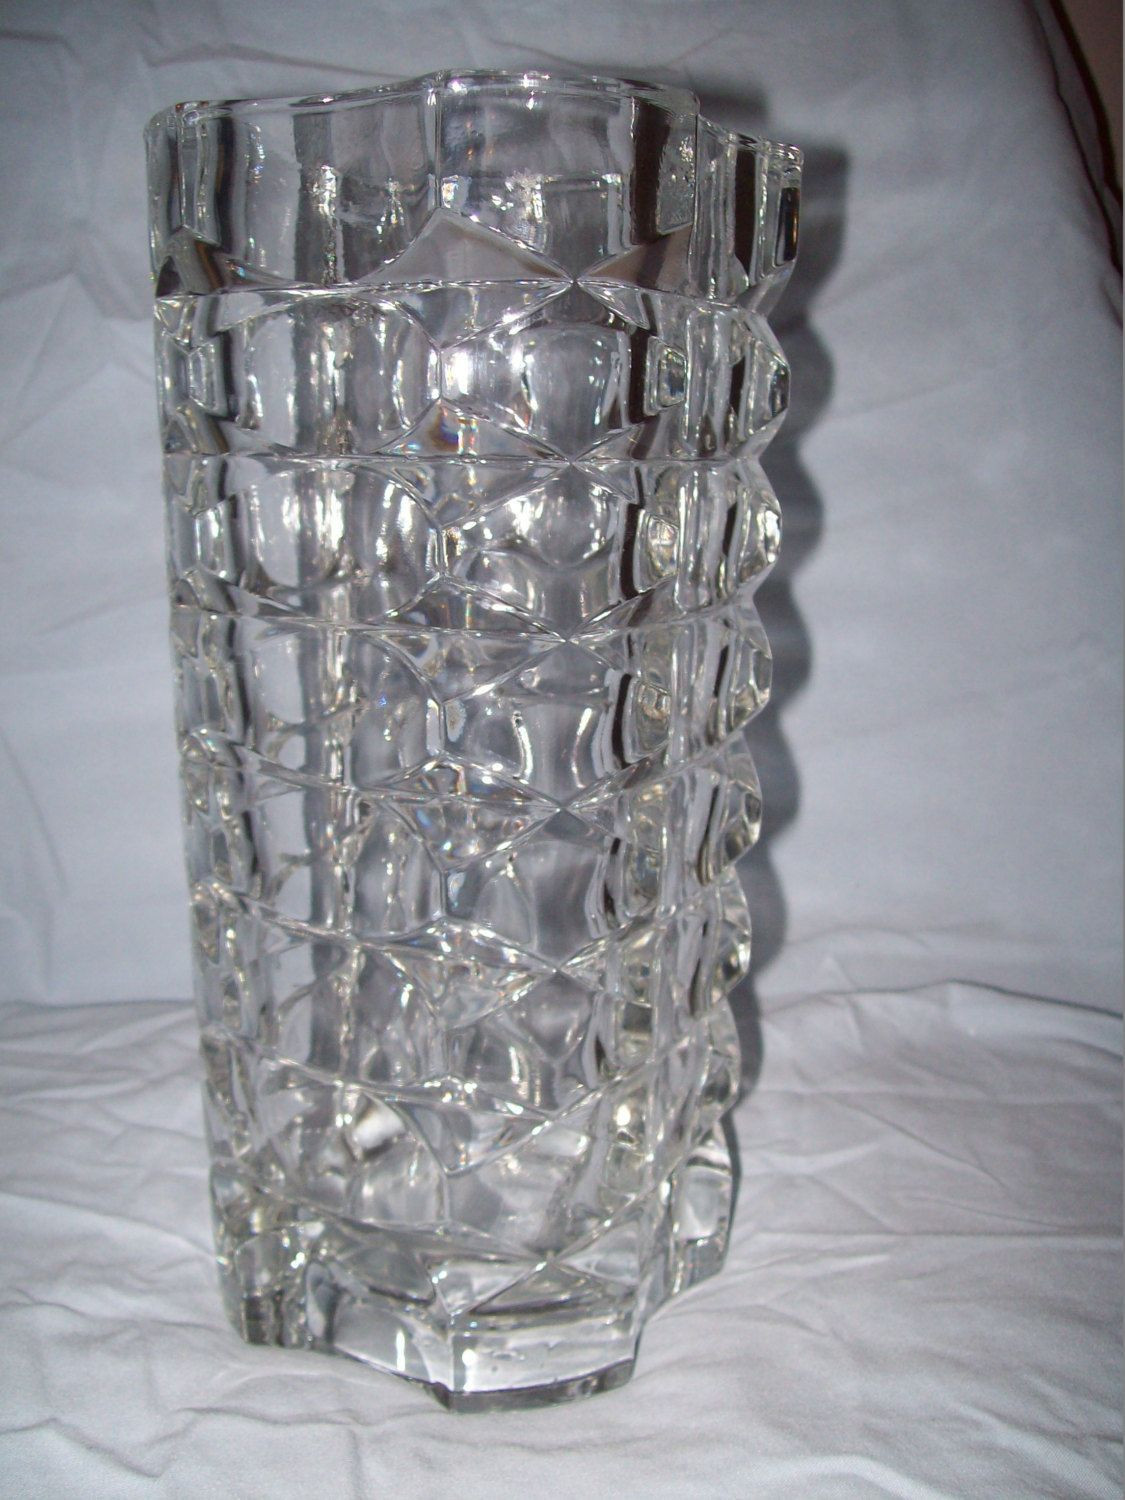 25 Unique 9 Inch Glass Vase 2024 free download 9 inch glass vase of extra large glass vase gallery clear glass very old large vase with regard to extra large glass vase gallery clear glass very old large vase leaded glass very heavy 66